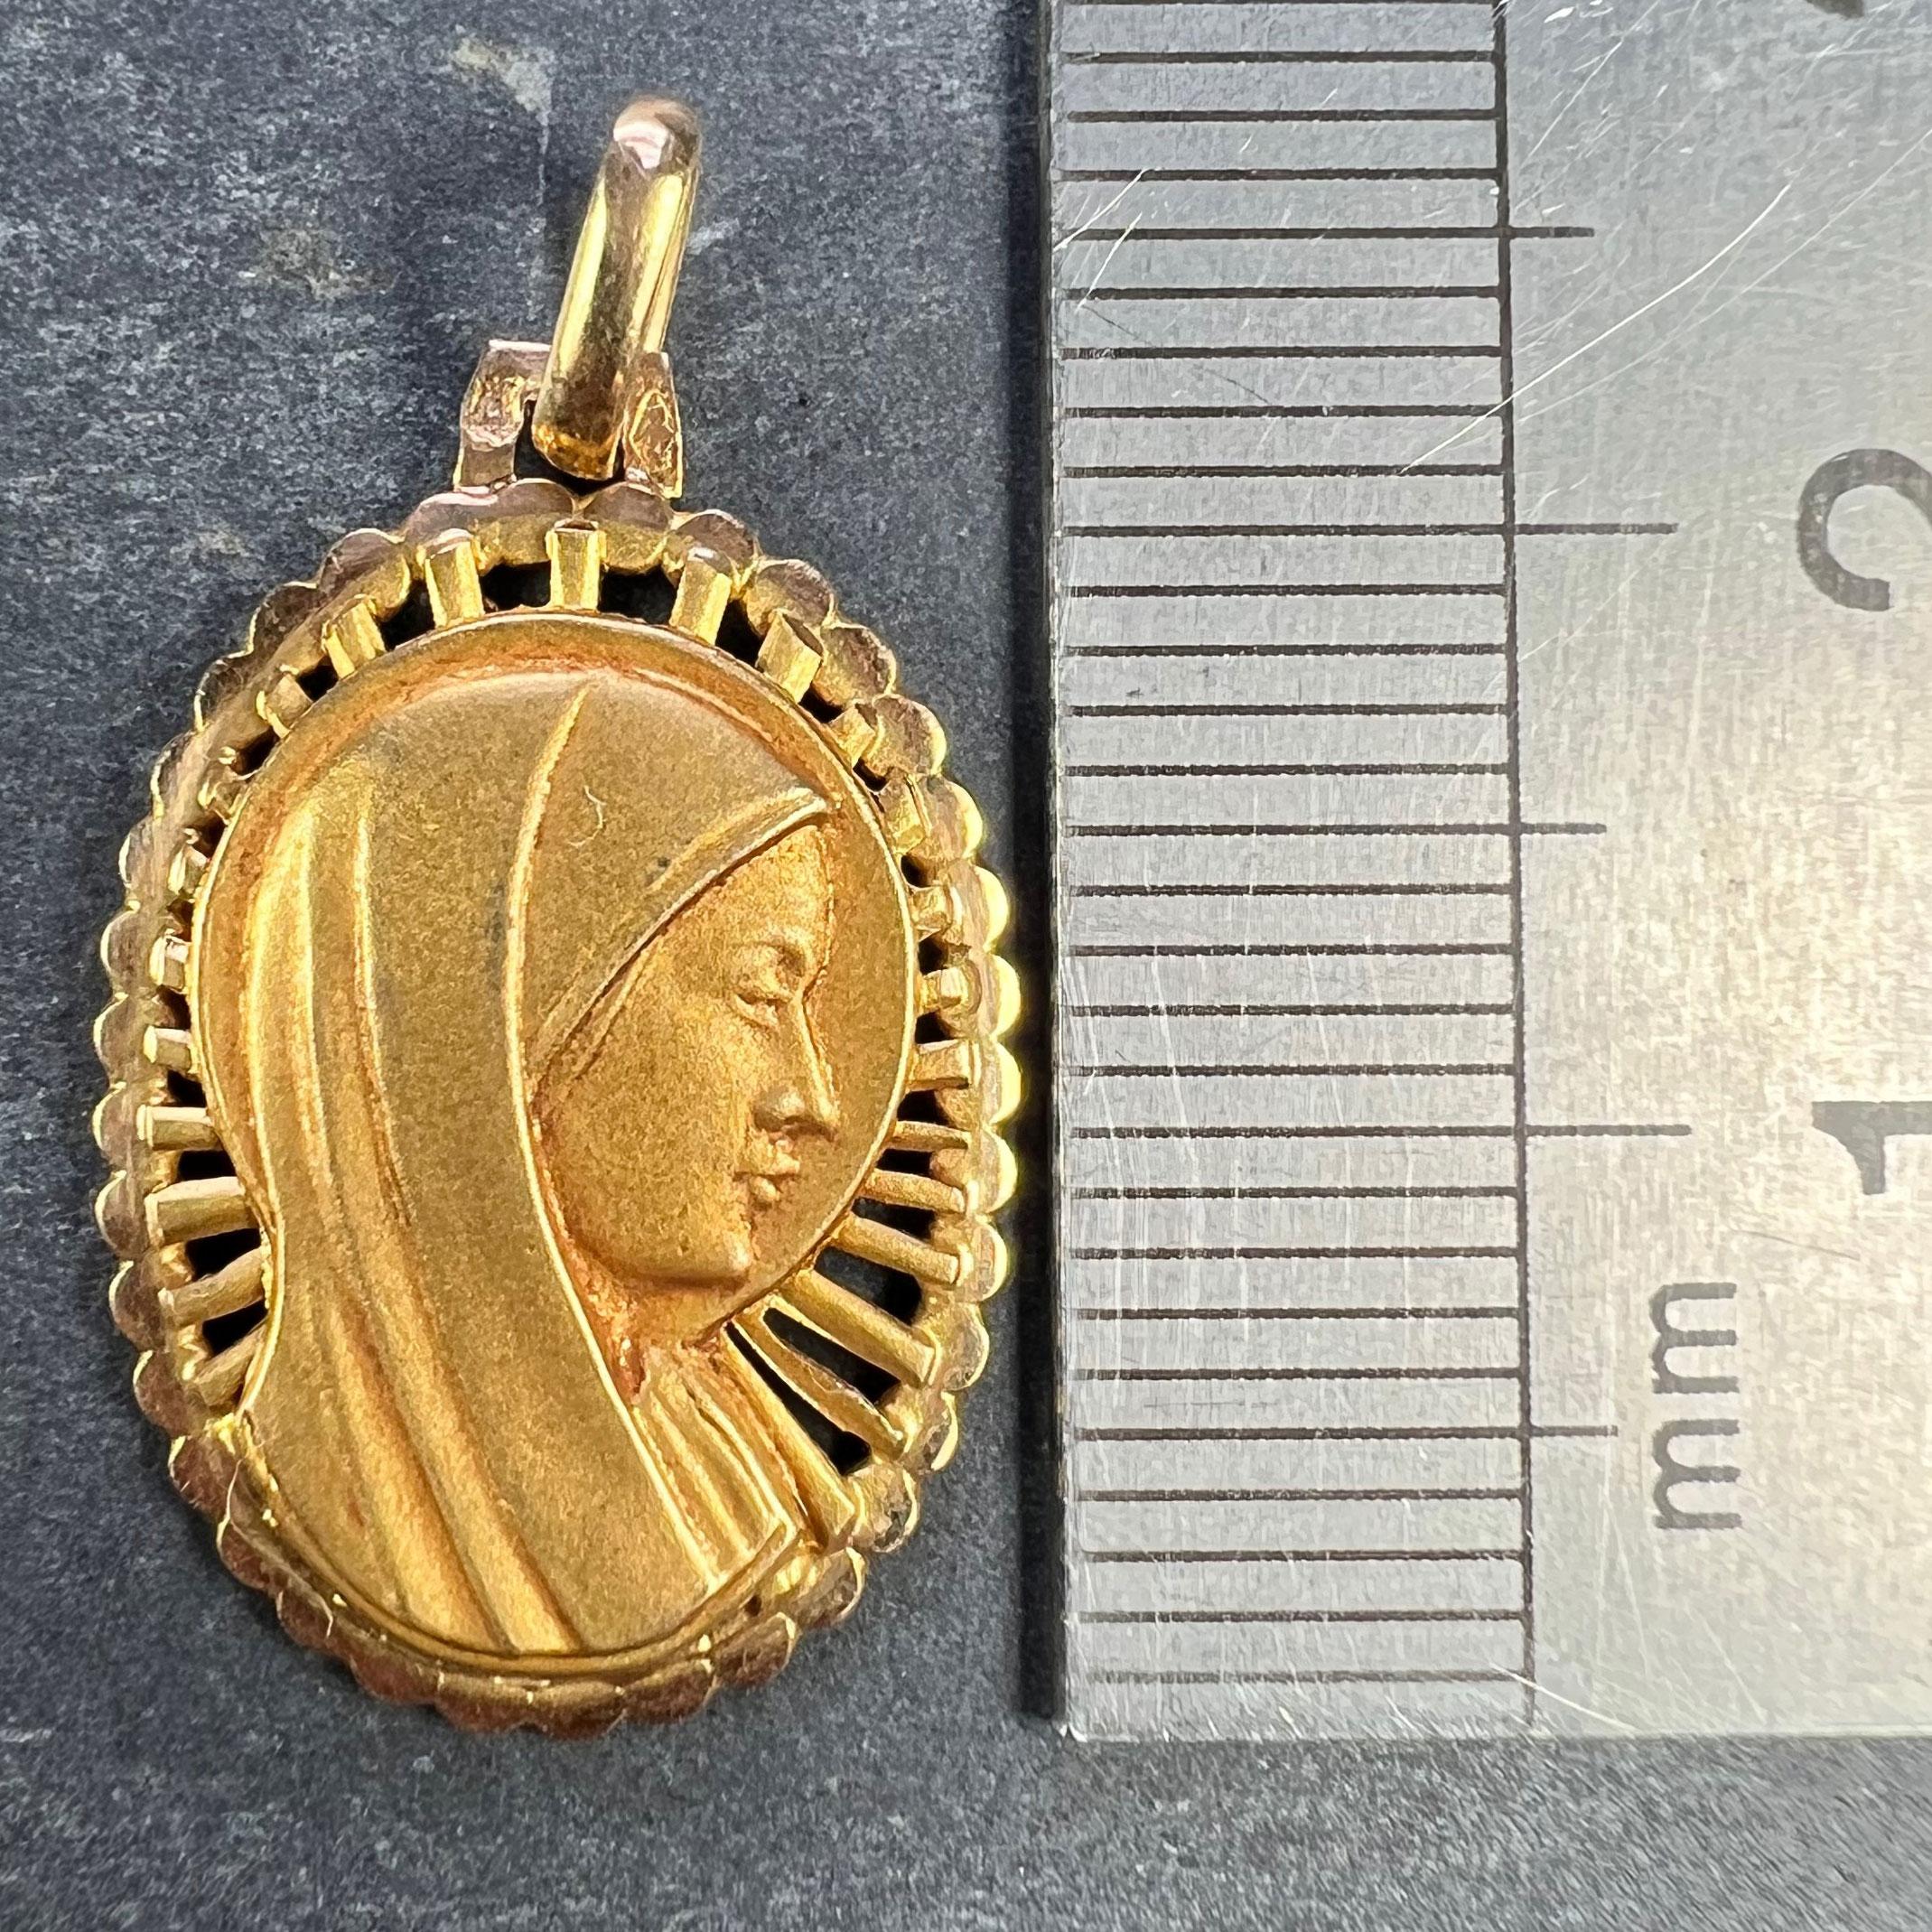 French Virgin Mary 18K Yellow Gold Religious Medal Pendant For Sale 5